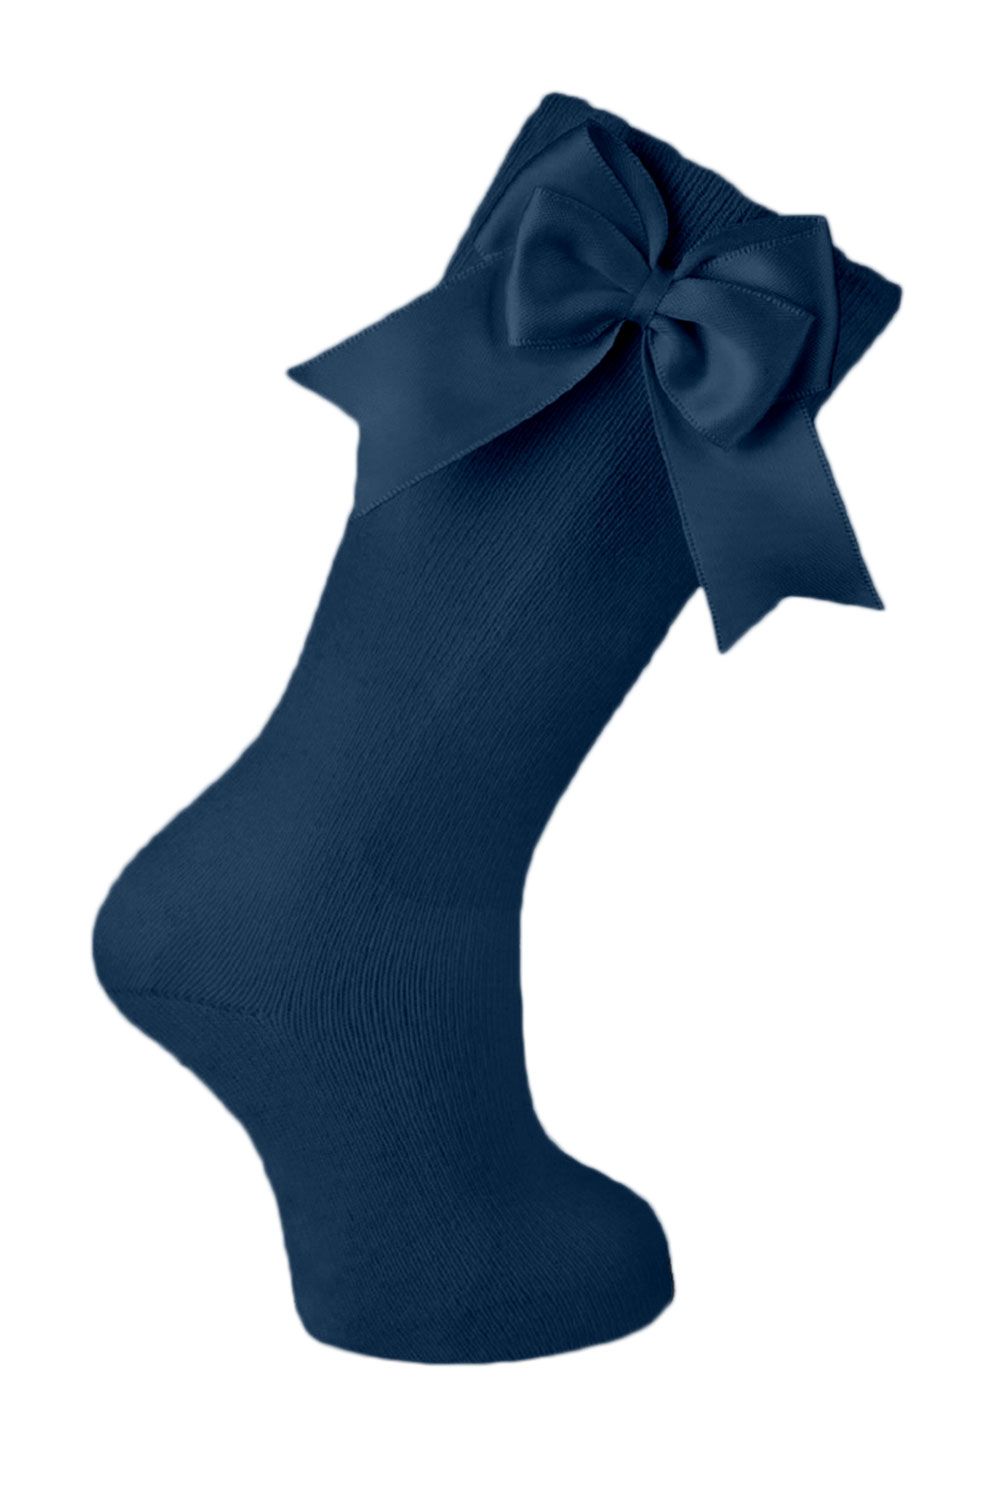 Cotton Knee Socks with Double Bow - Navy